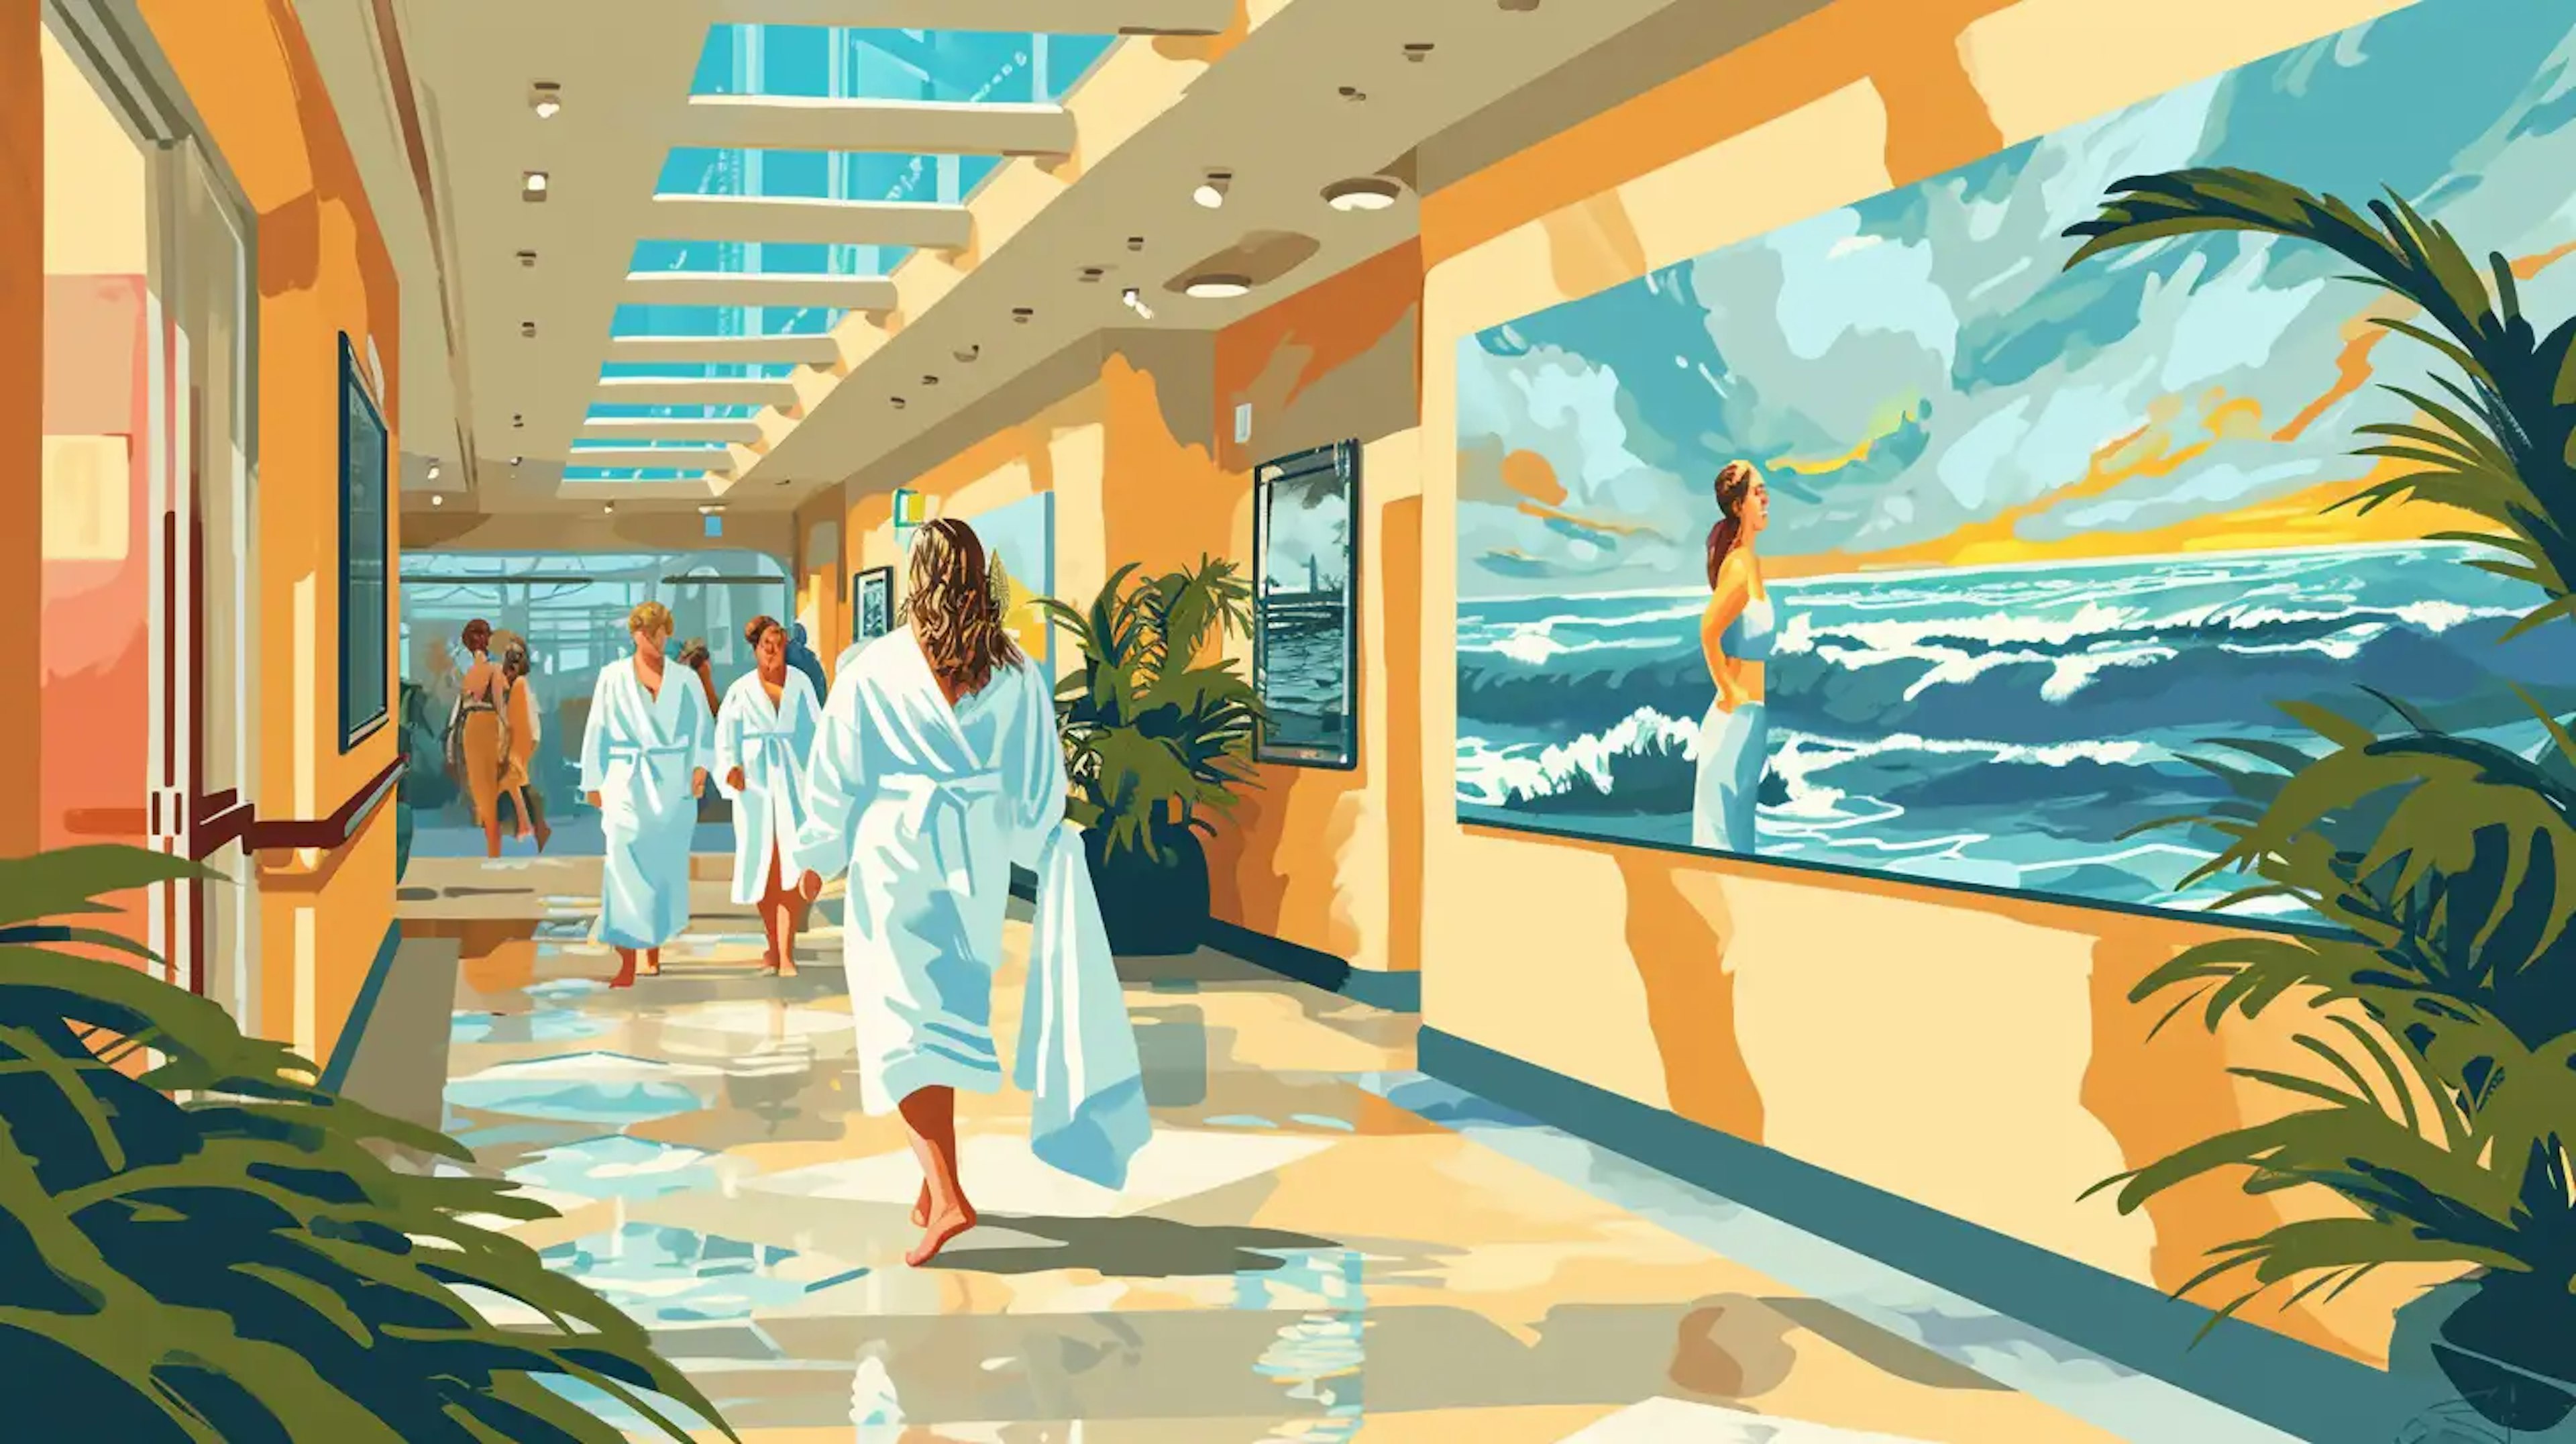 An illustration of a cozy spa interior with seascape paintings hanging on the wall as patreons walk by in robes and towels.